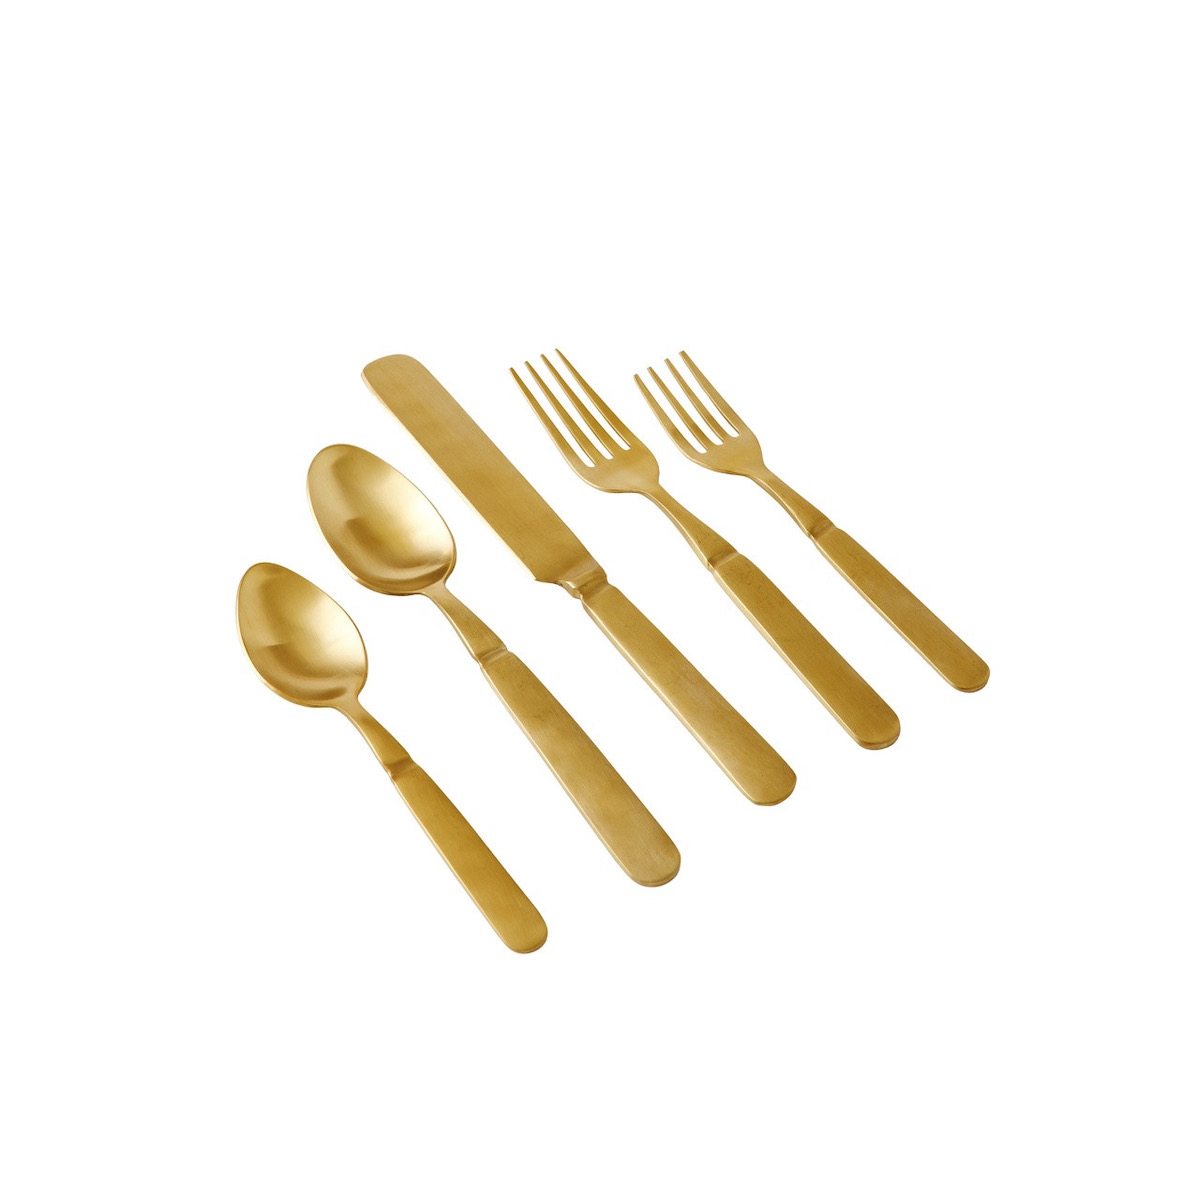 5 Flatware Sets to Spruce Up Your Table - Table Magazine